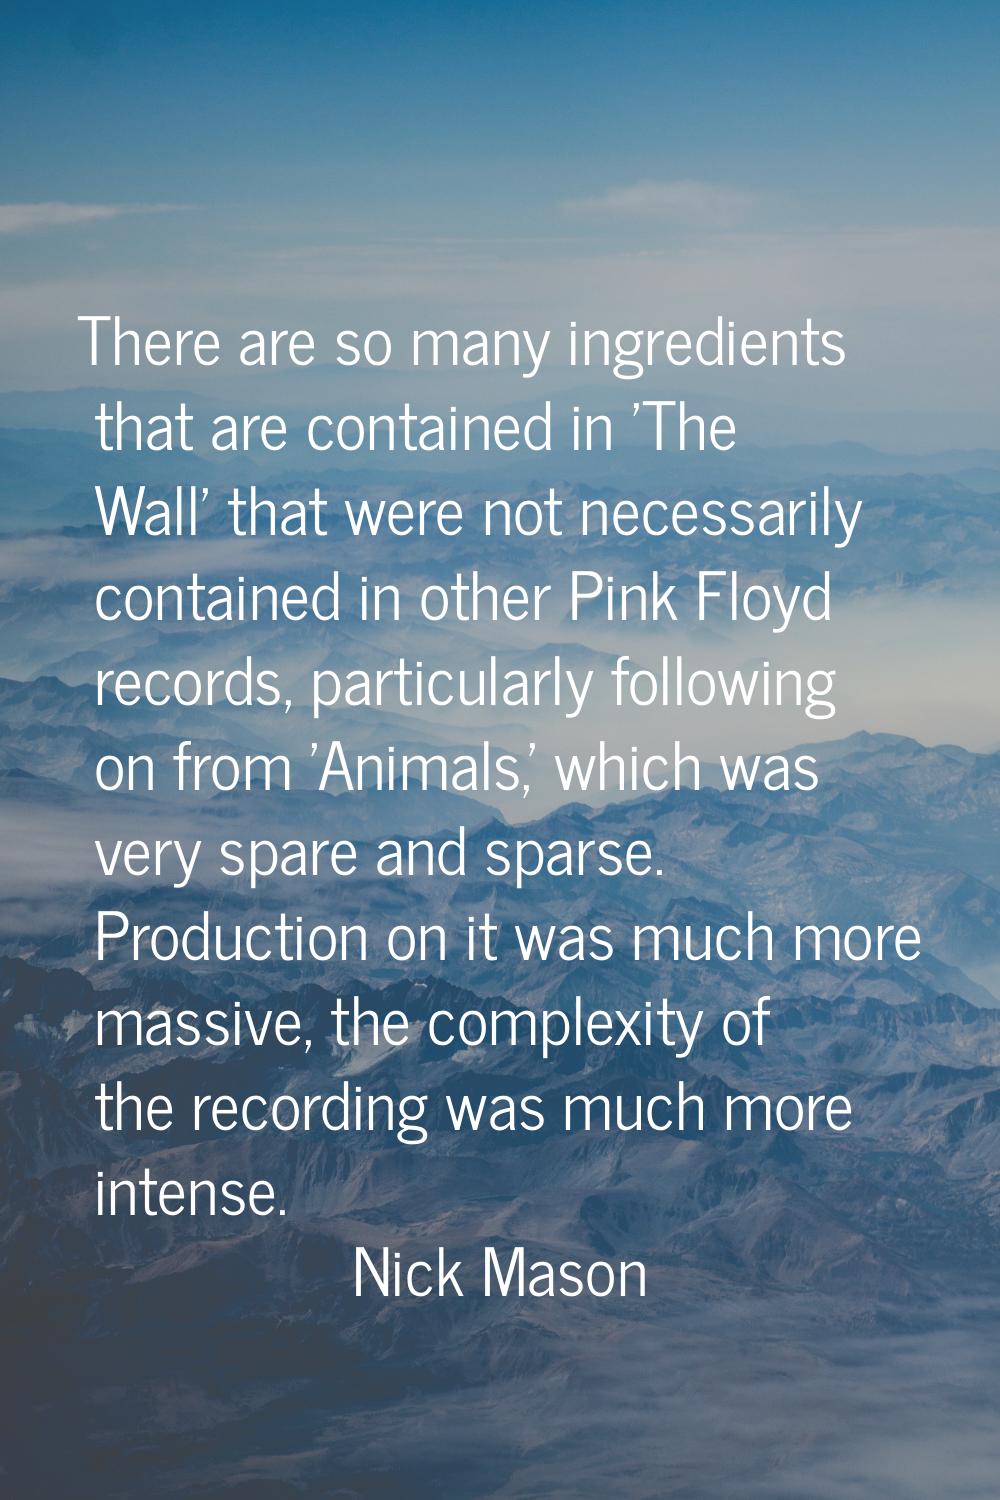 There are so many ingredients that are contained in 'The Wall' that were not necessarily contained 